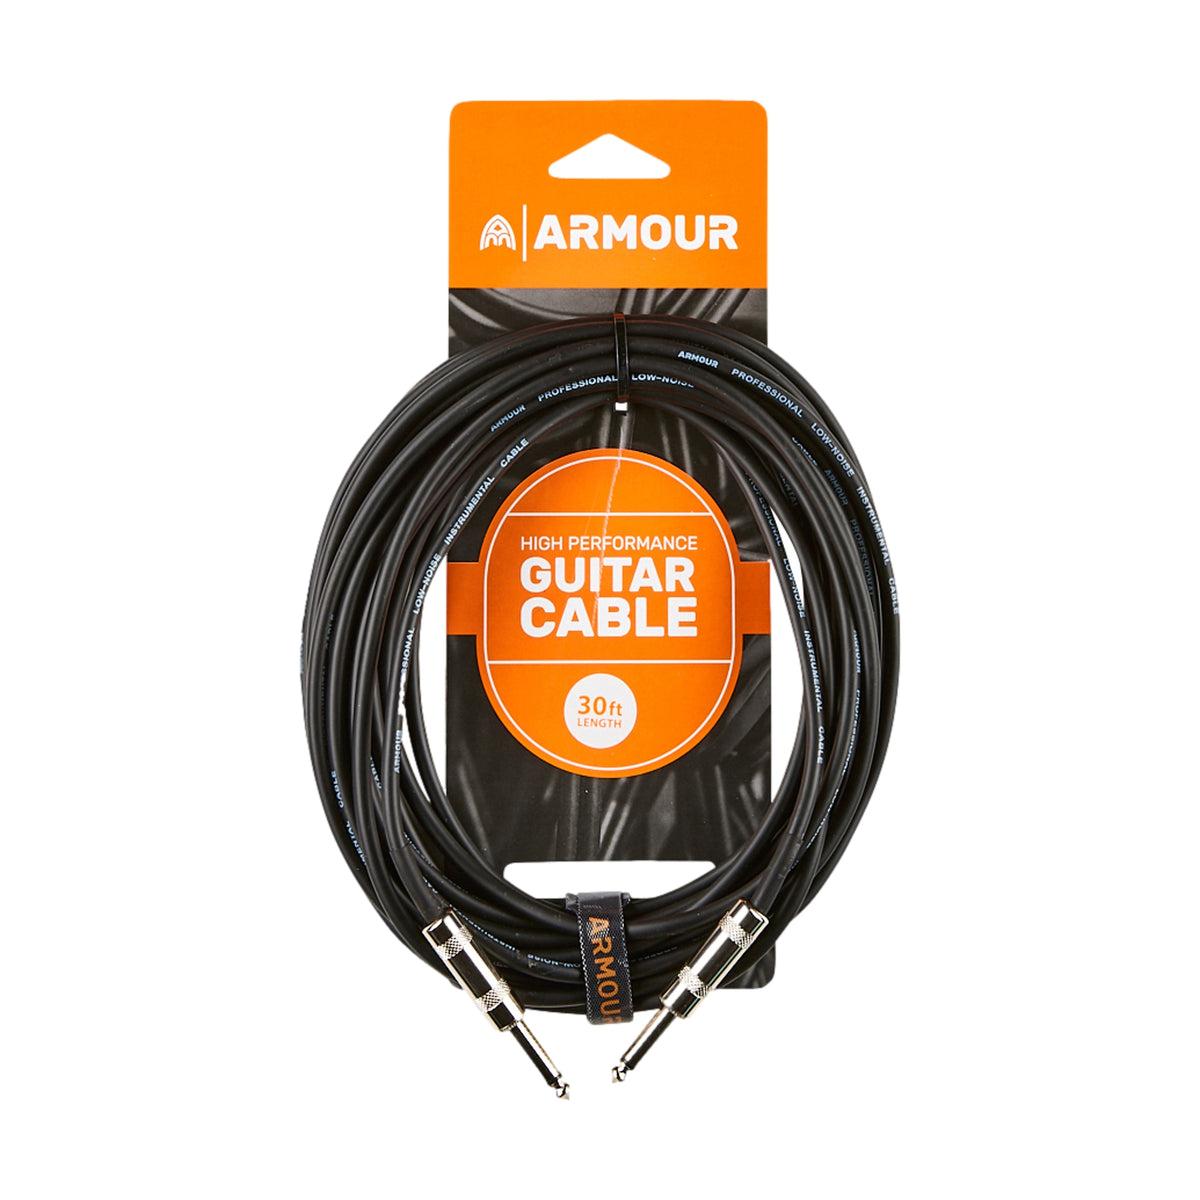 Armour 30ft Guitar Cable